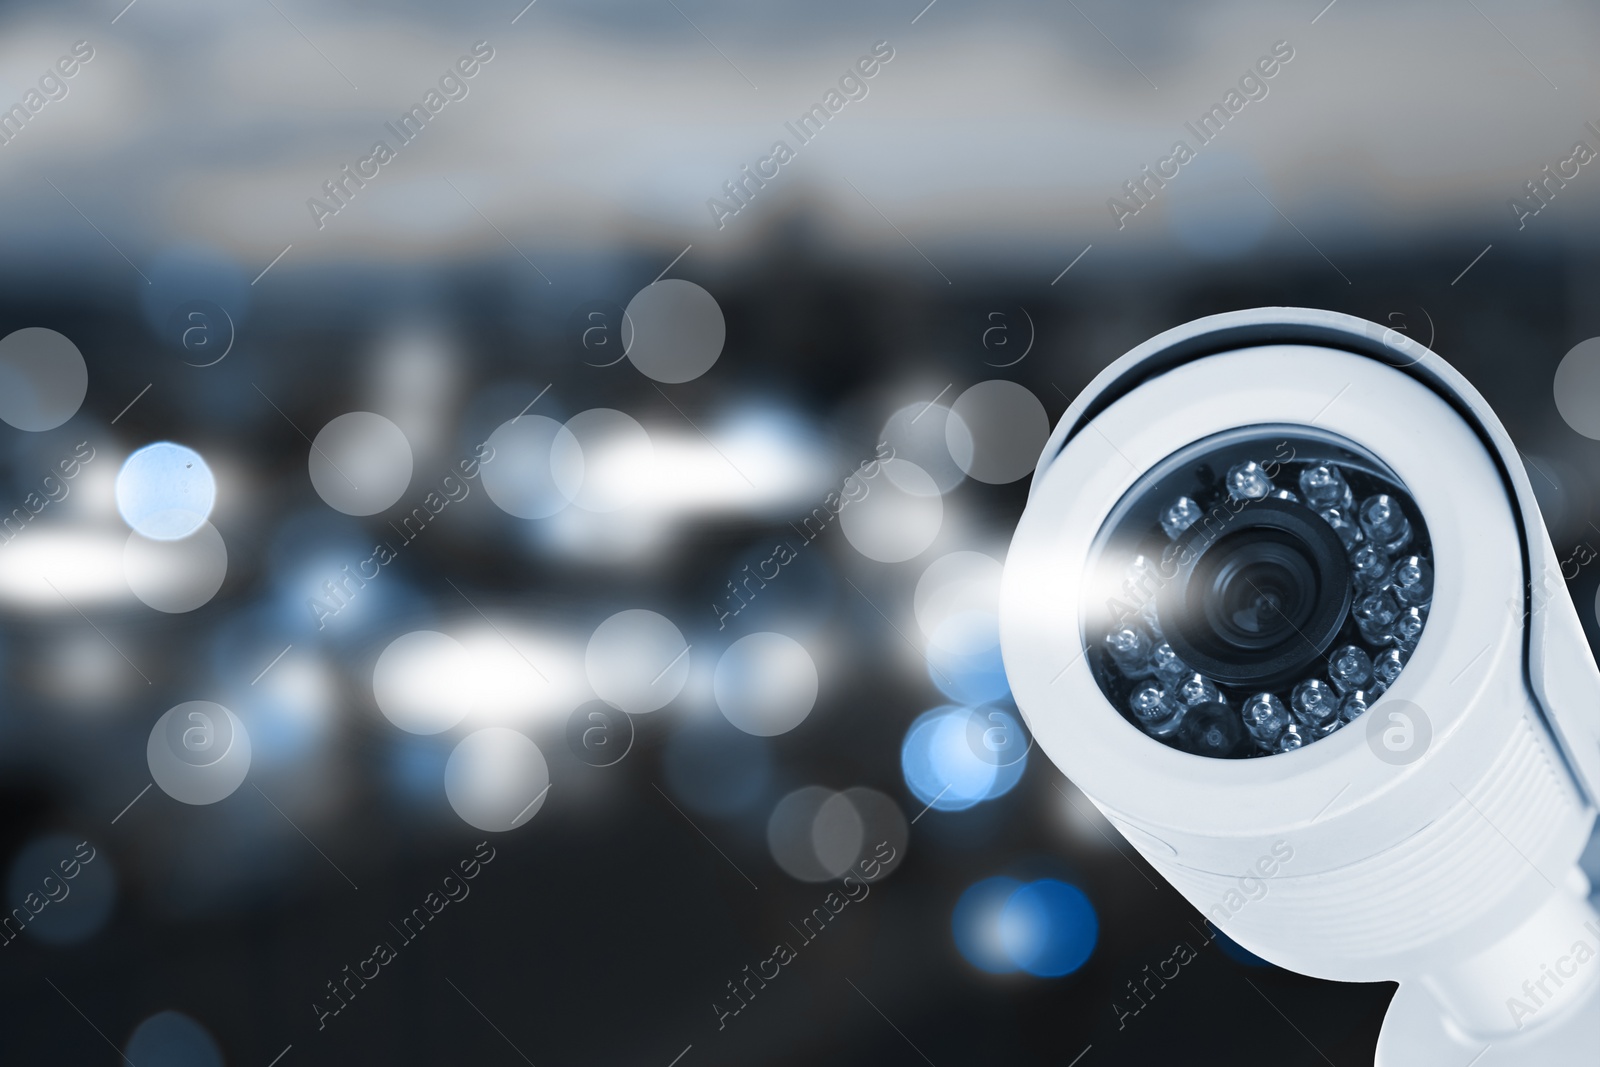 Image of Modern security CCTV camera against blurred background, space for text